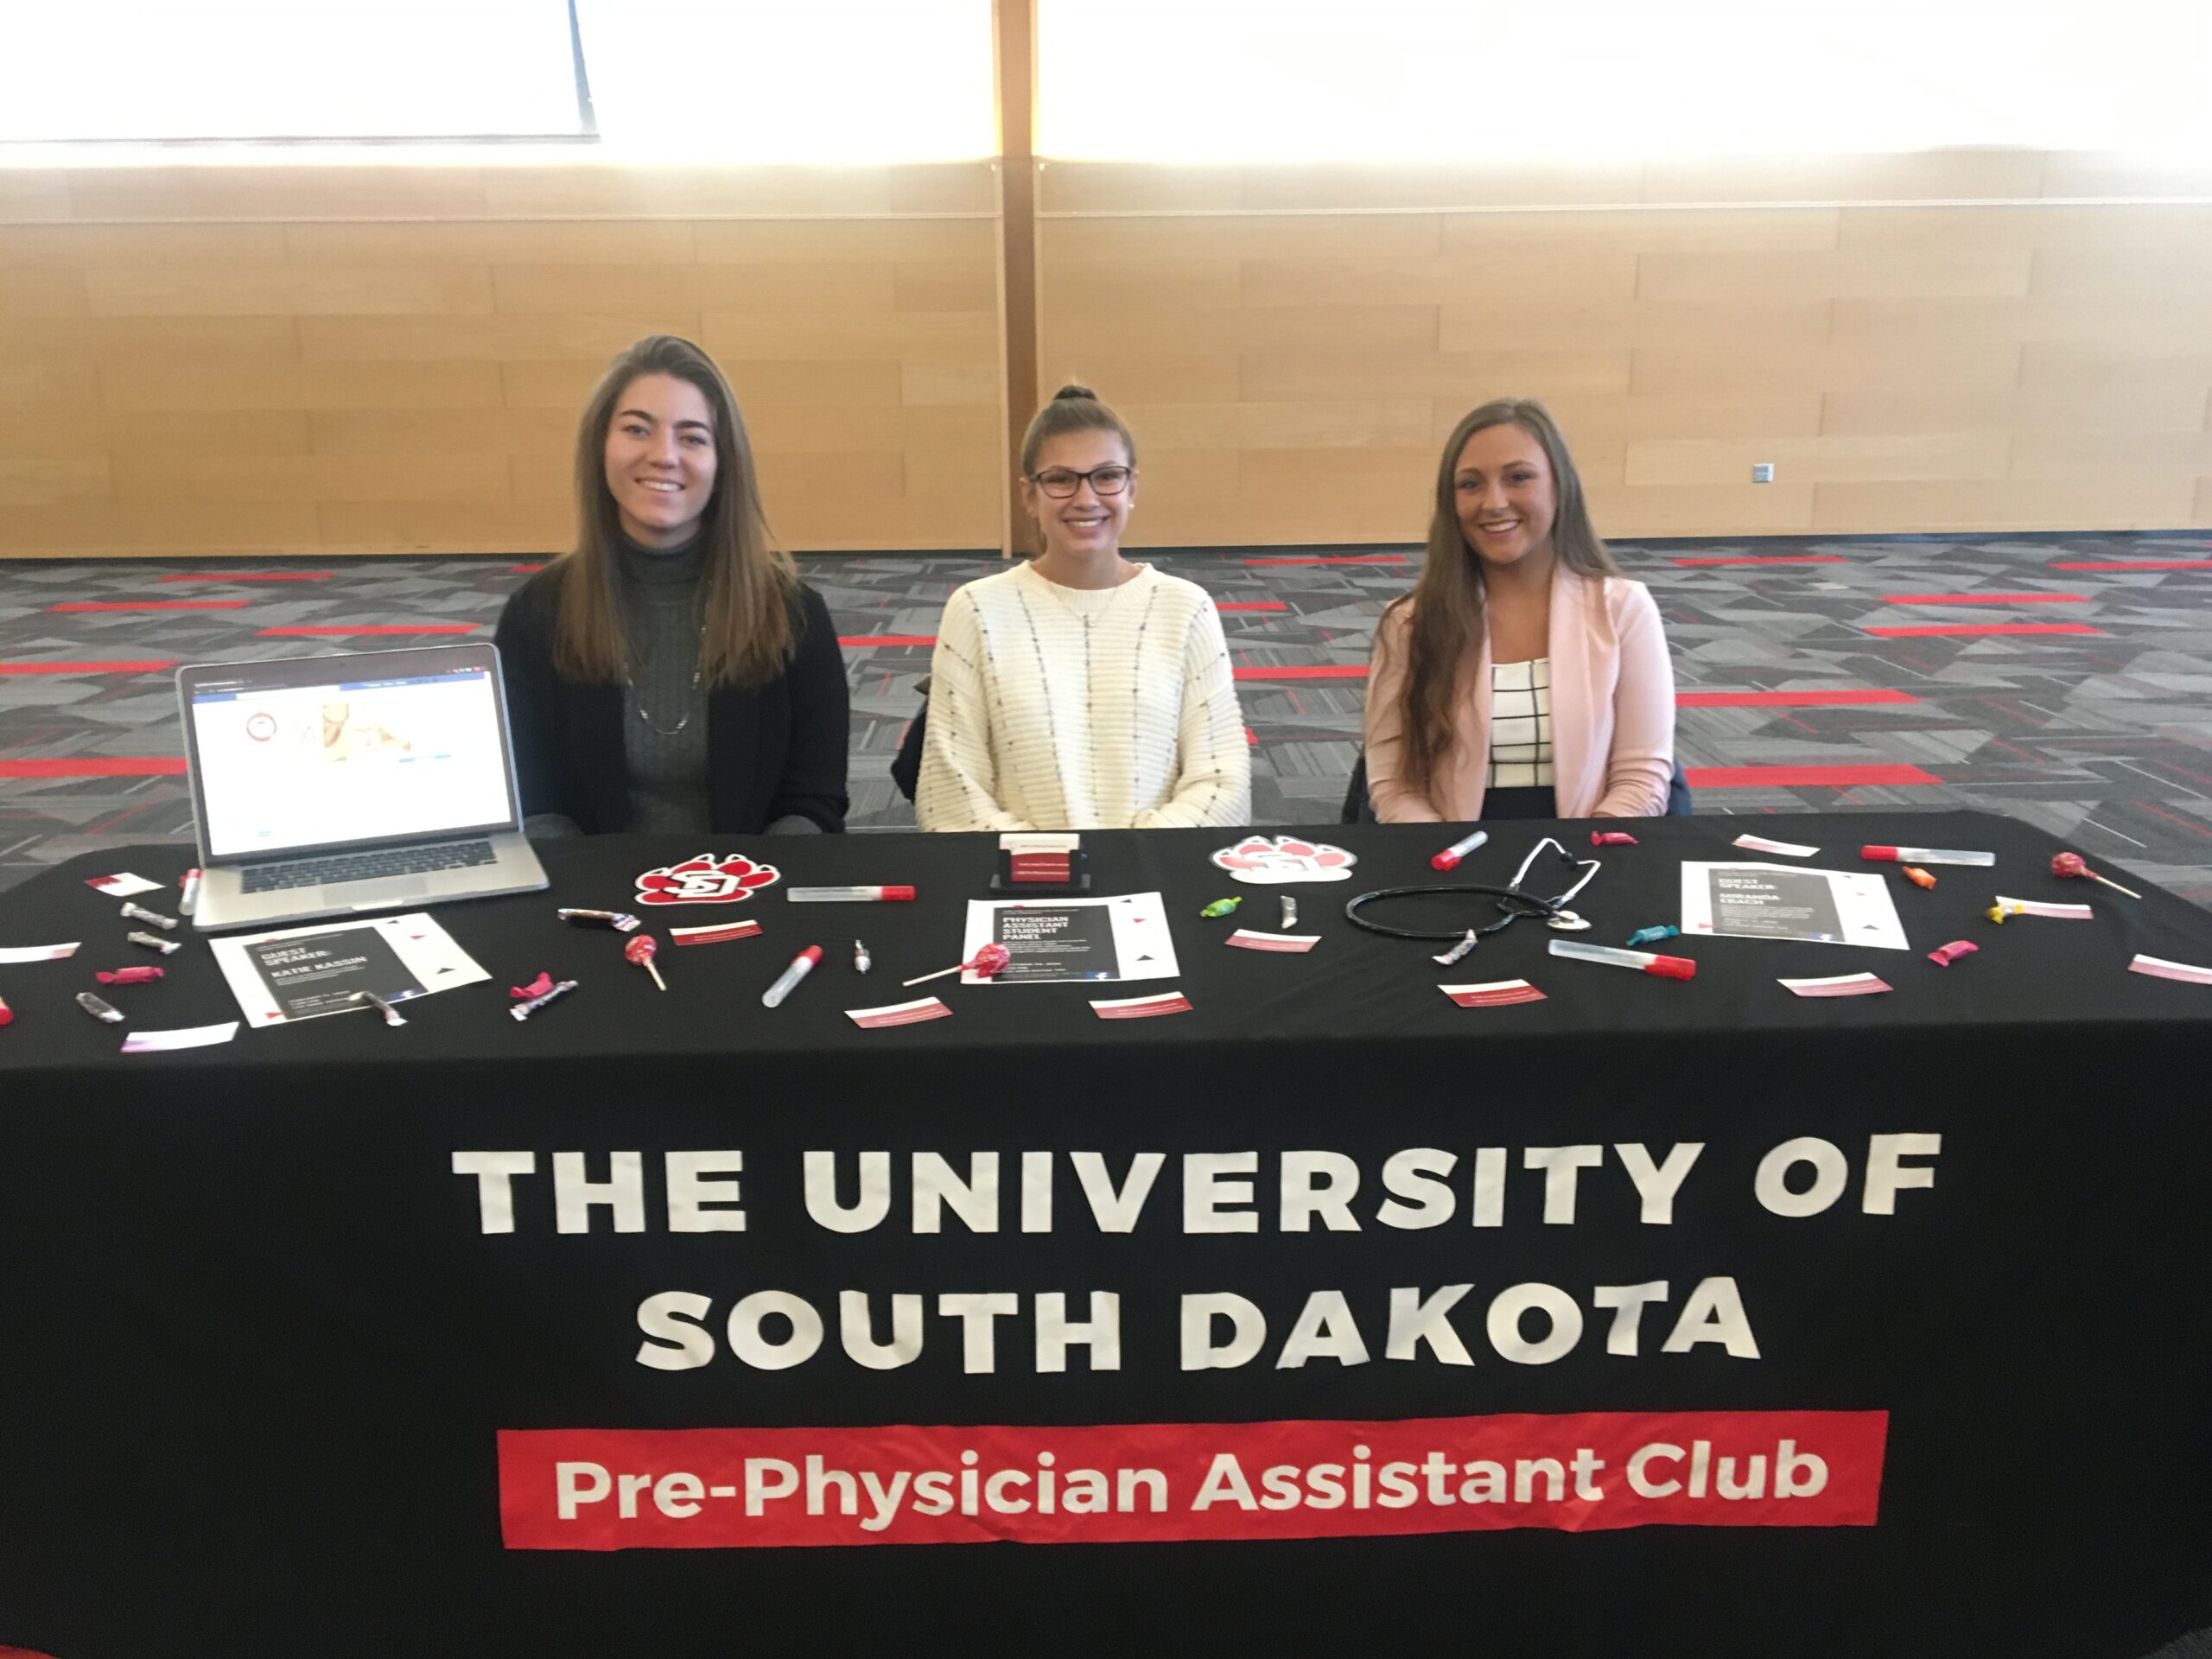 Pre-Physician’s Assistant Club provides resources, help to students looking to become PAs